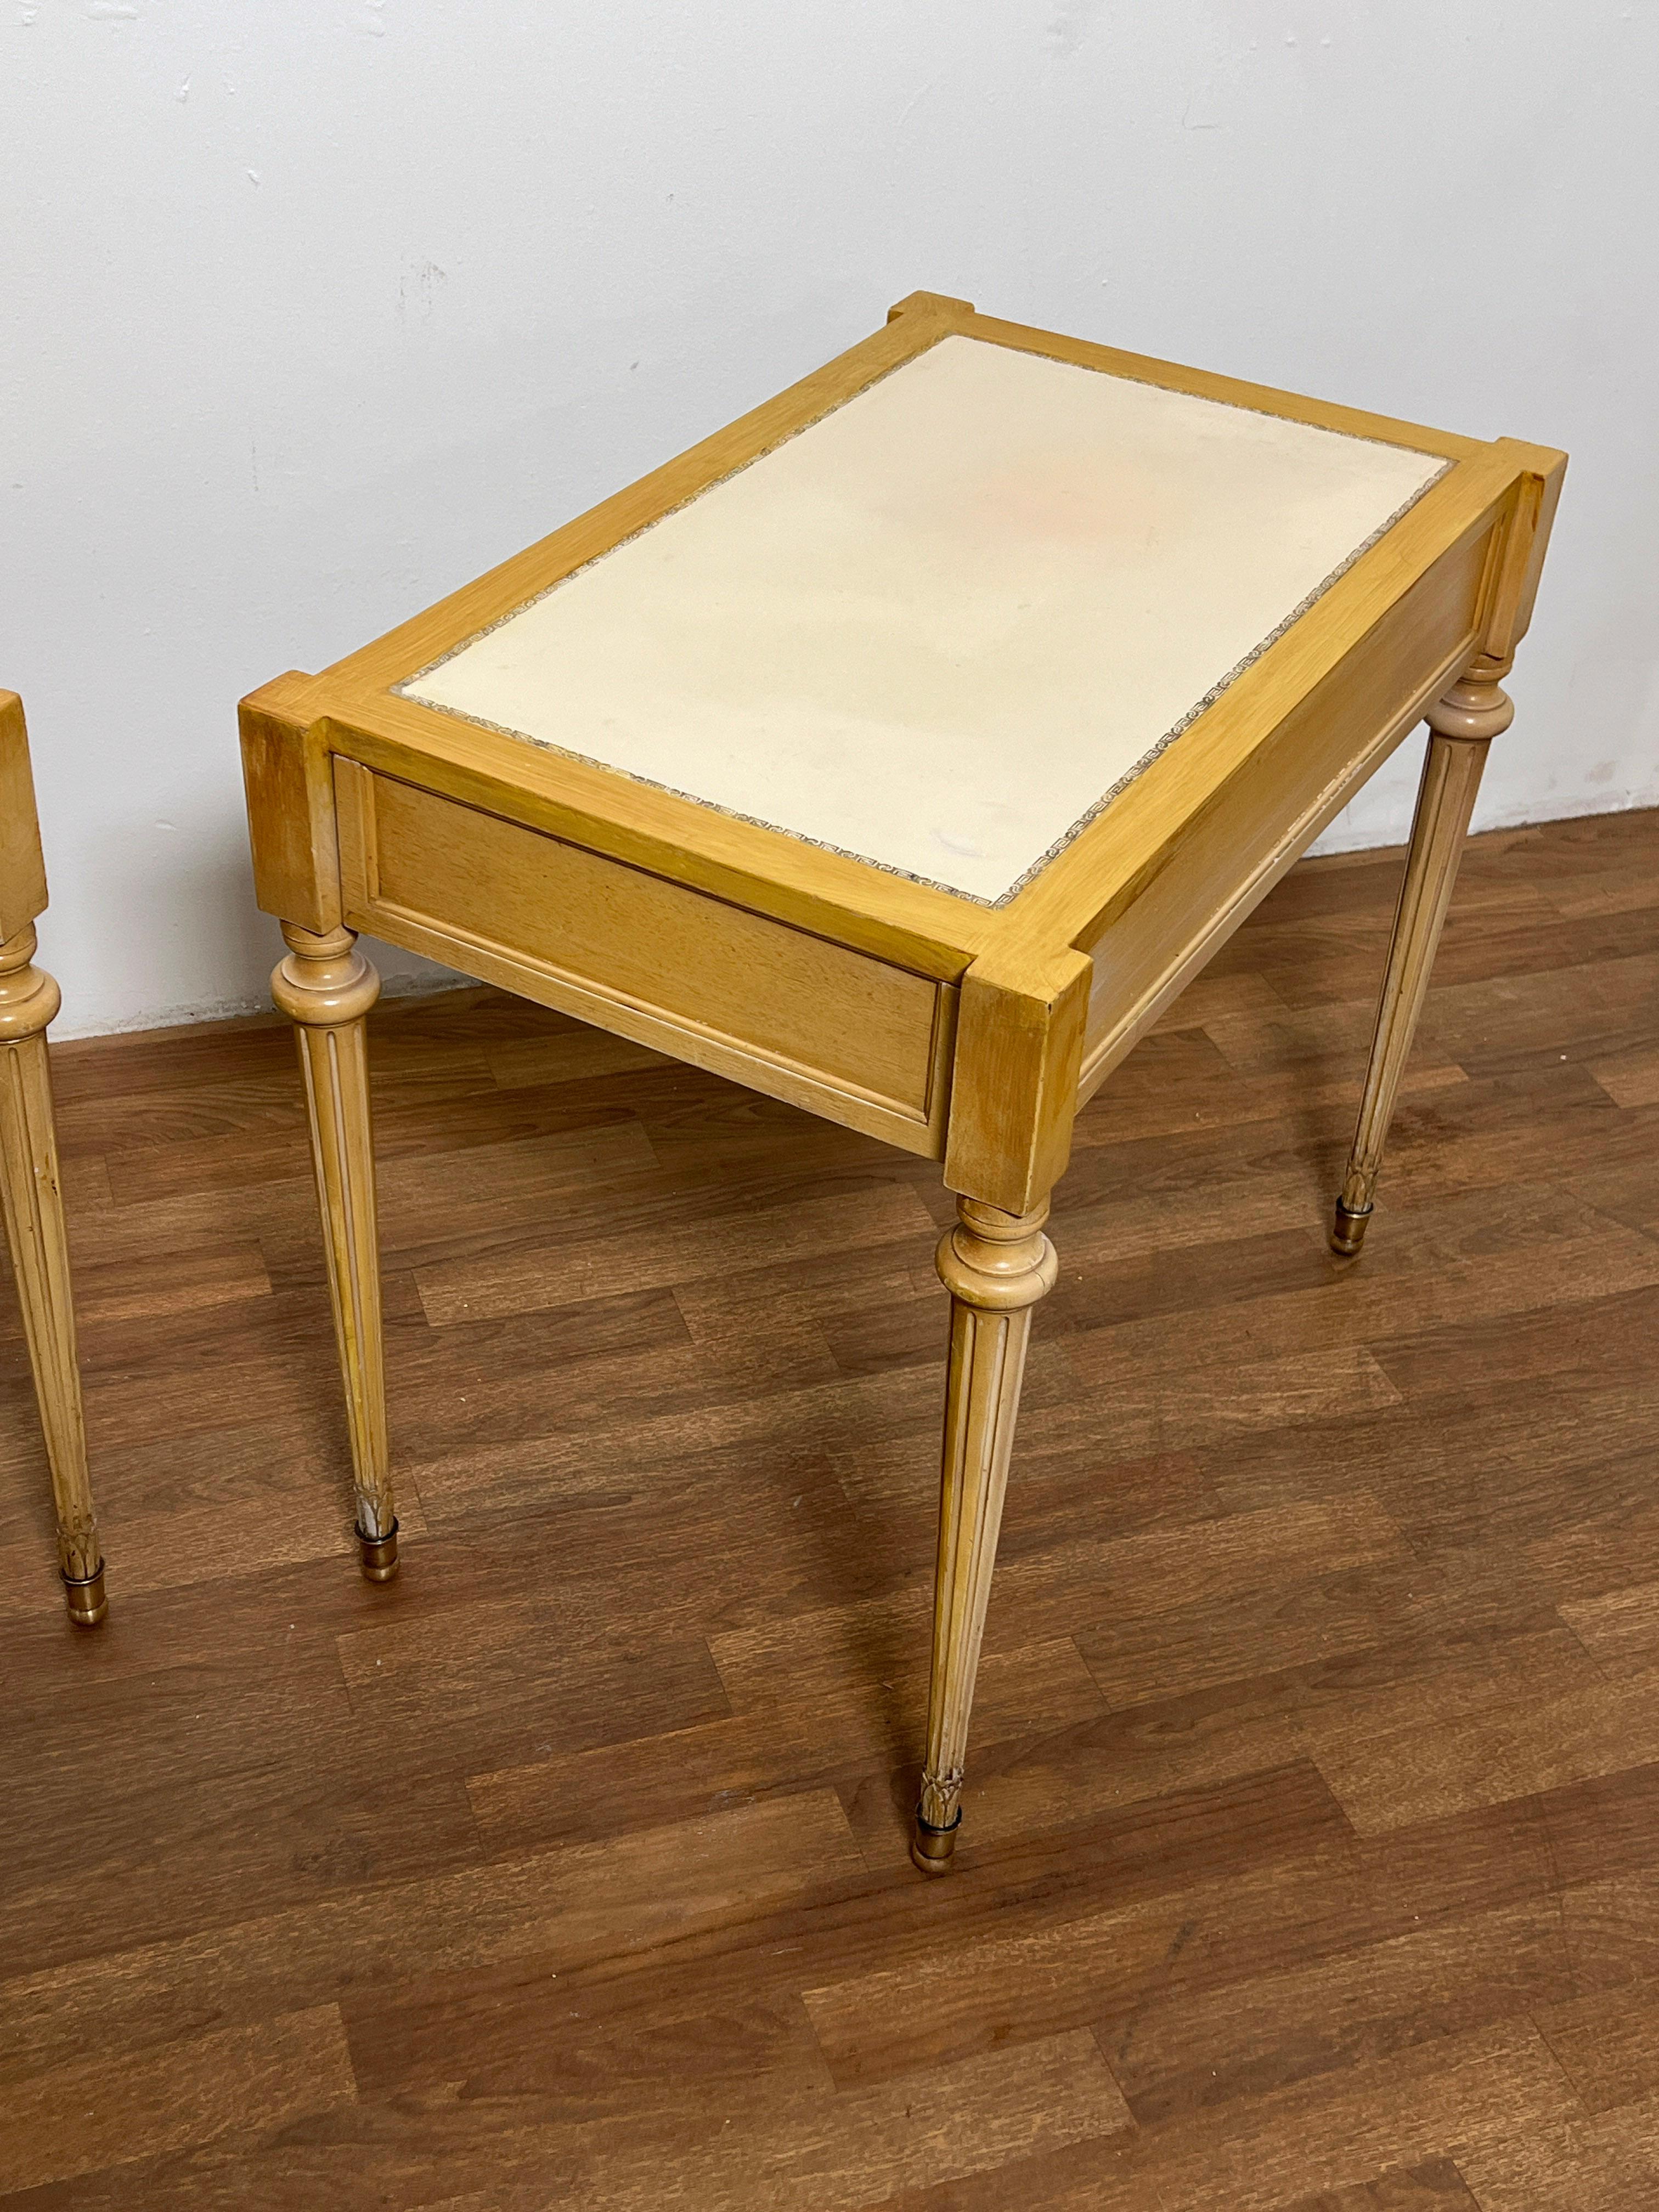 American Pair of Louis XVI Style Side Tables With Leather Tops by F & G Furniture, 1950s For Sale